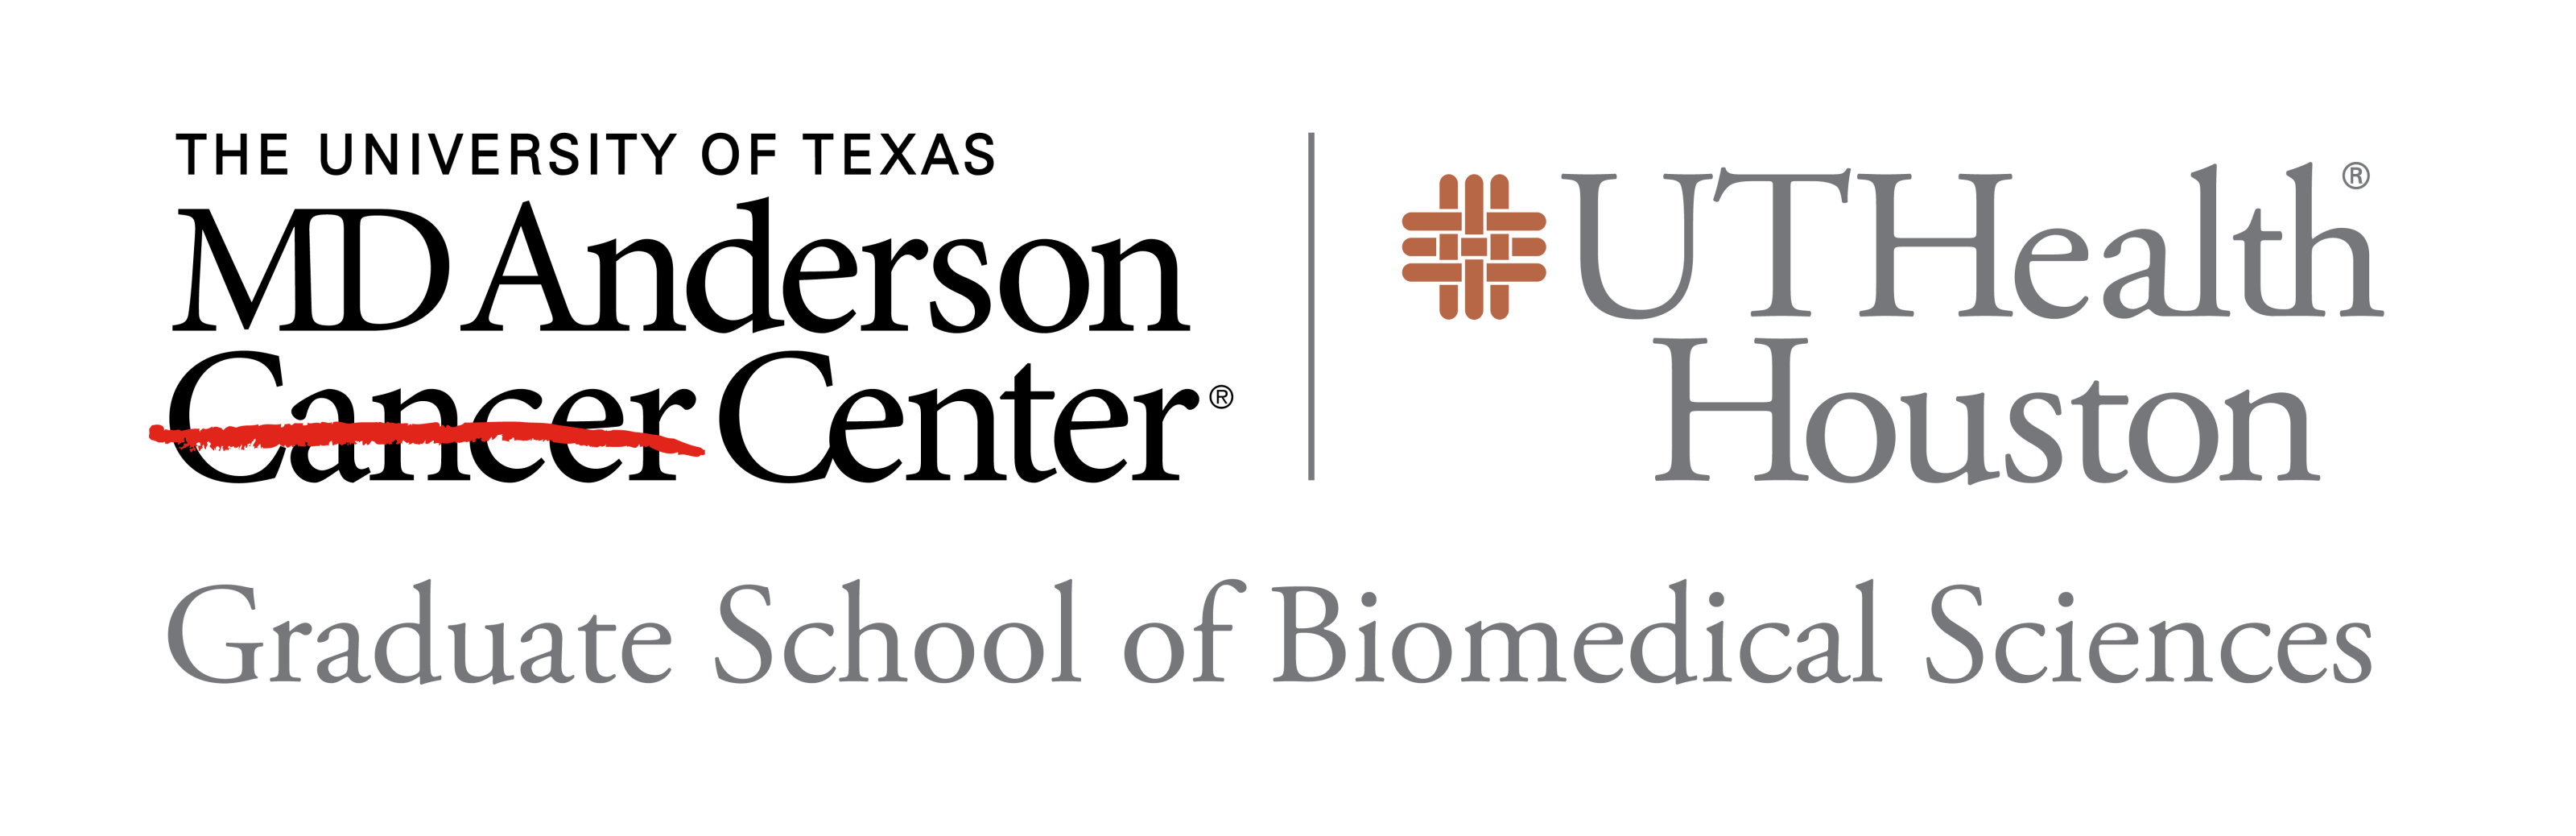 Logo for MD Anderson and UT Health